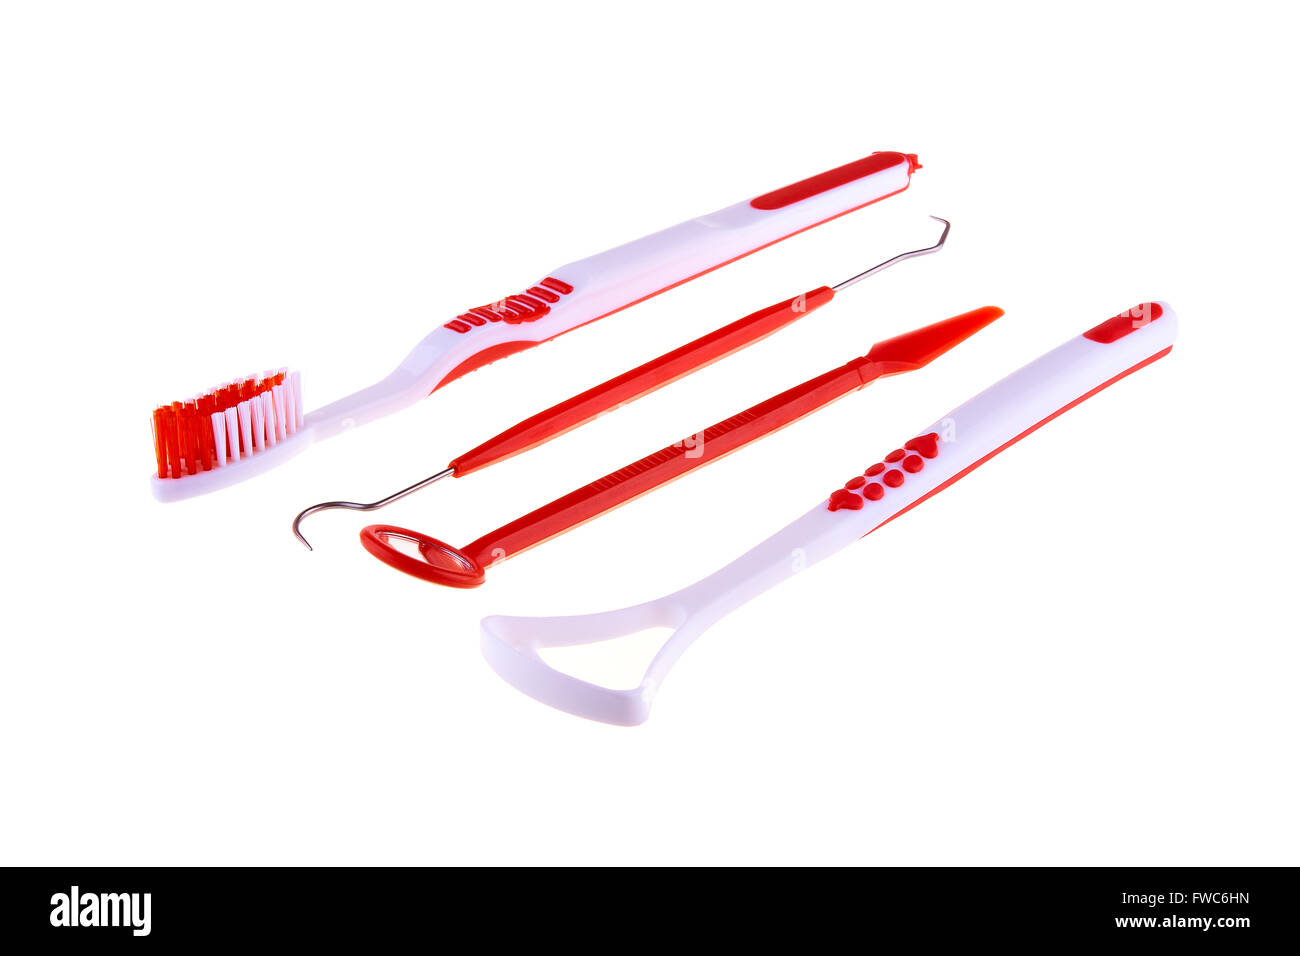 Oral health care equipment isolated on white Stock Photo